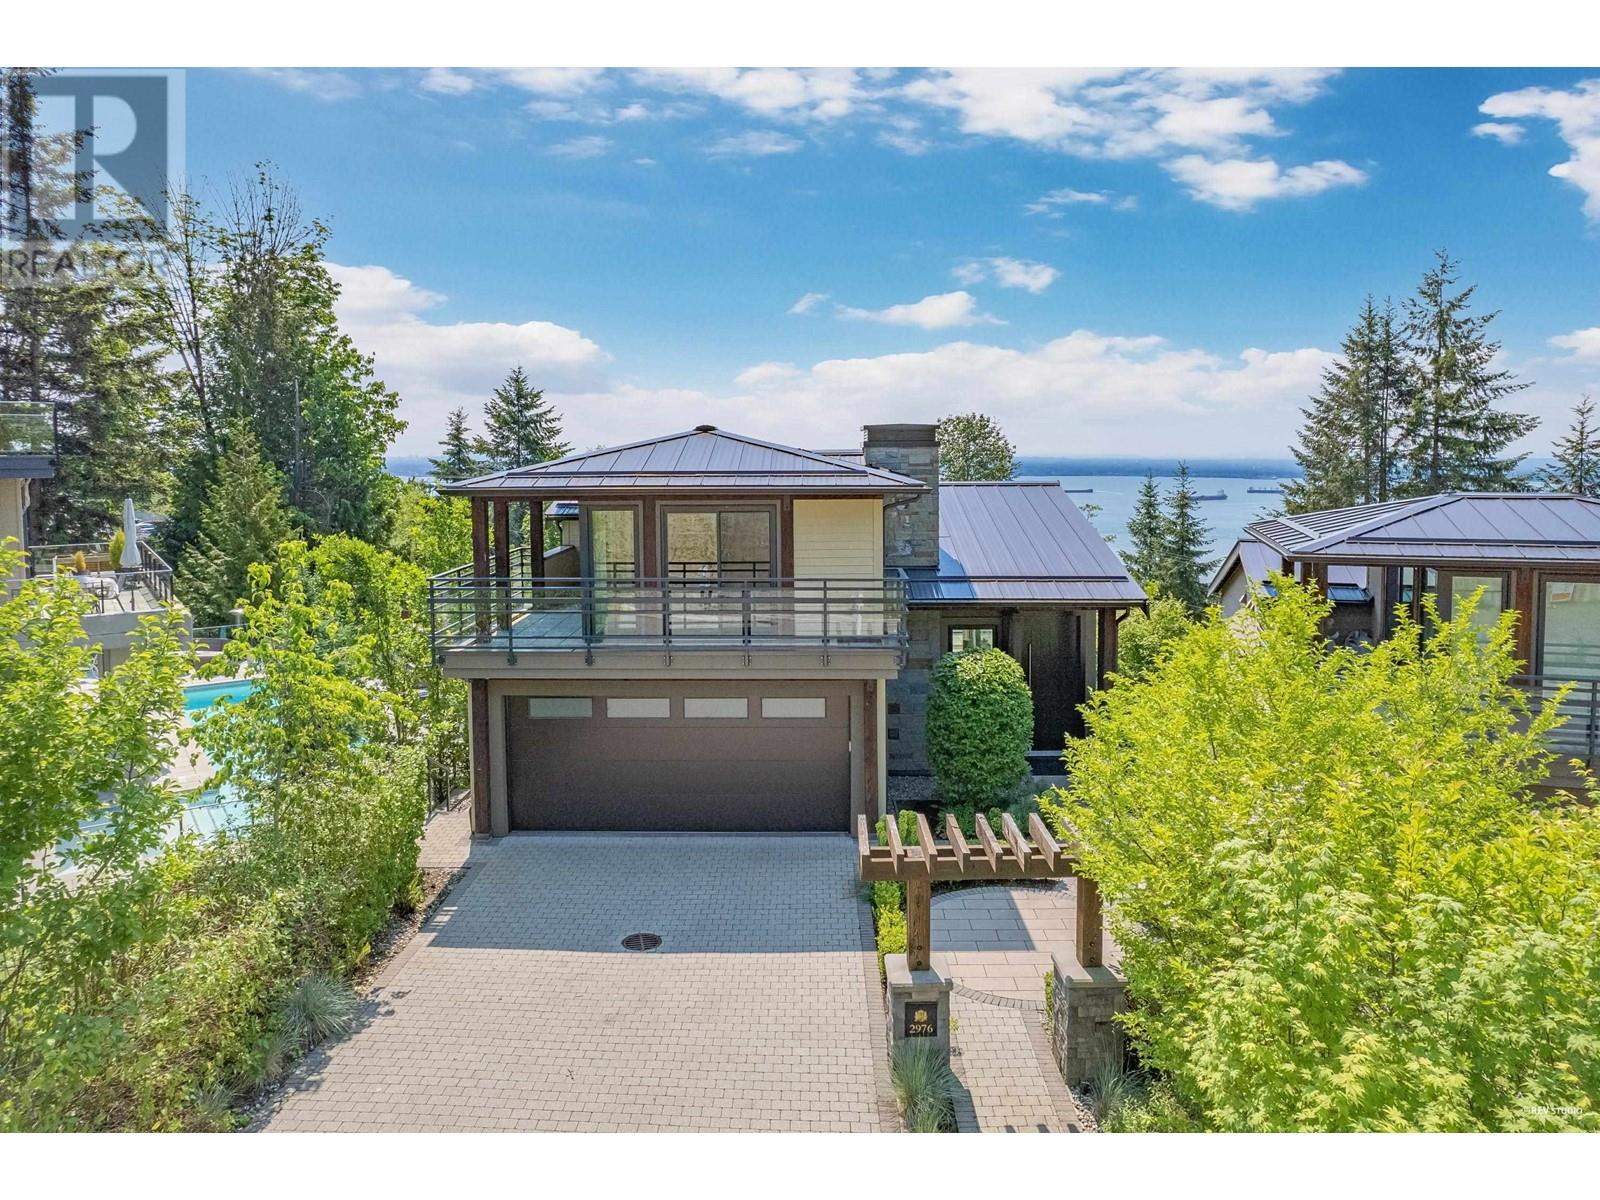 2976 BURFIELD PLACE, west vancouver, British Columbia